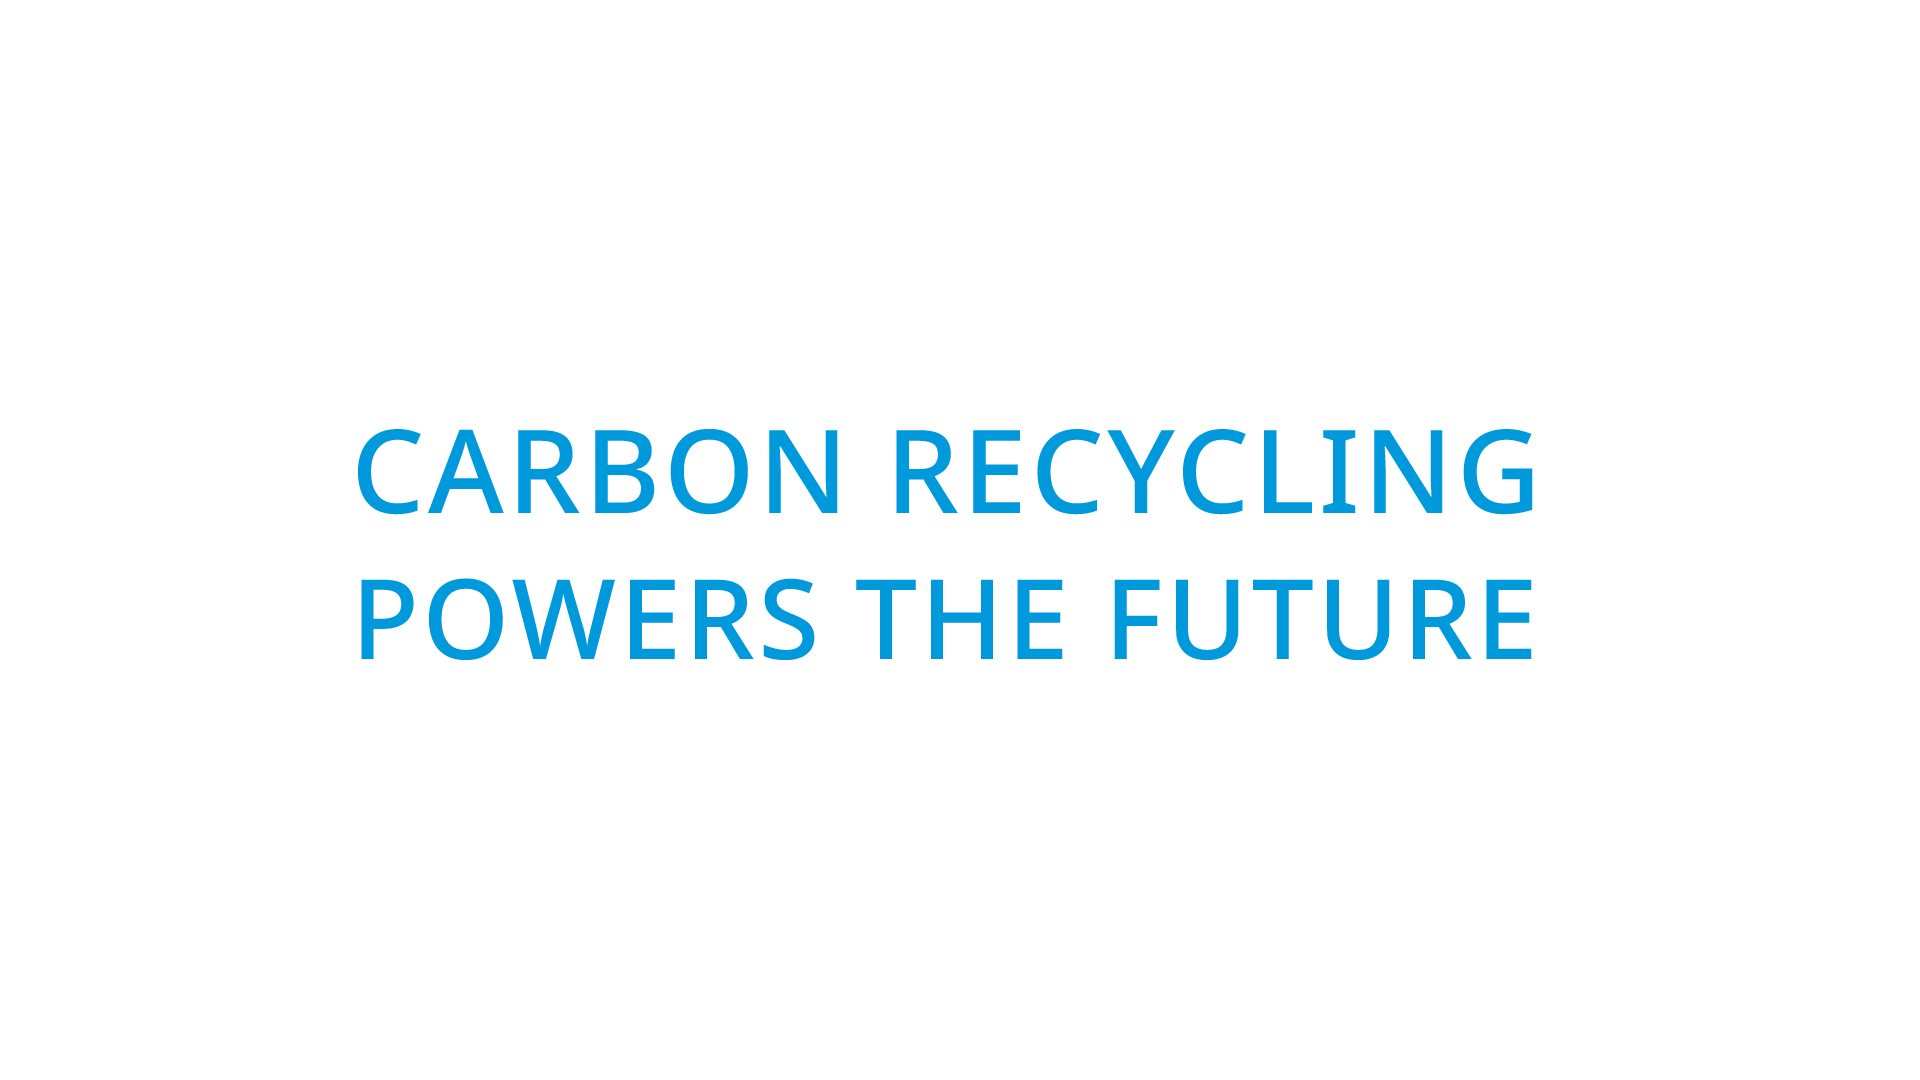 4th International Conference on Carbon Recycling 2022